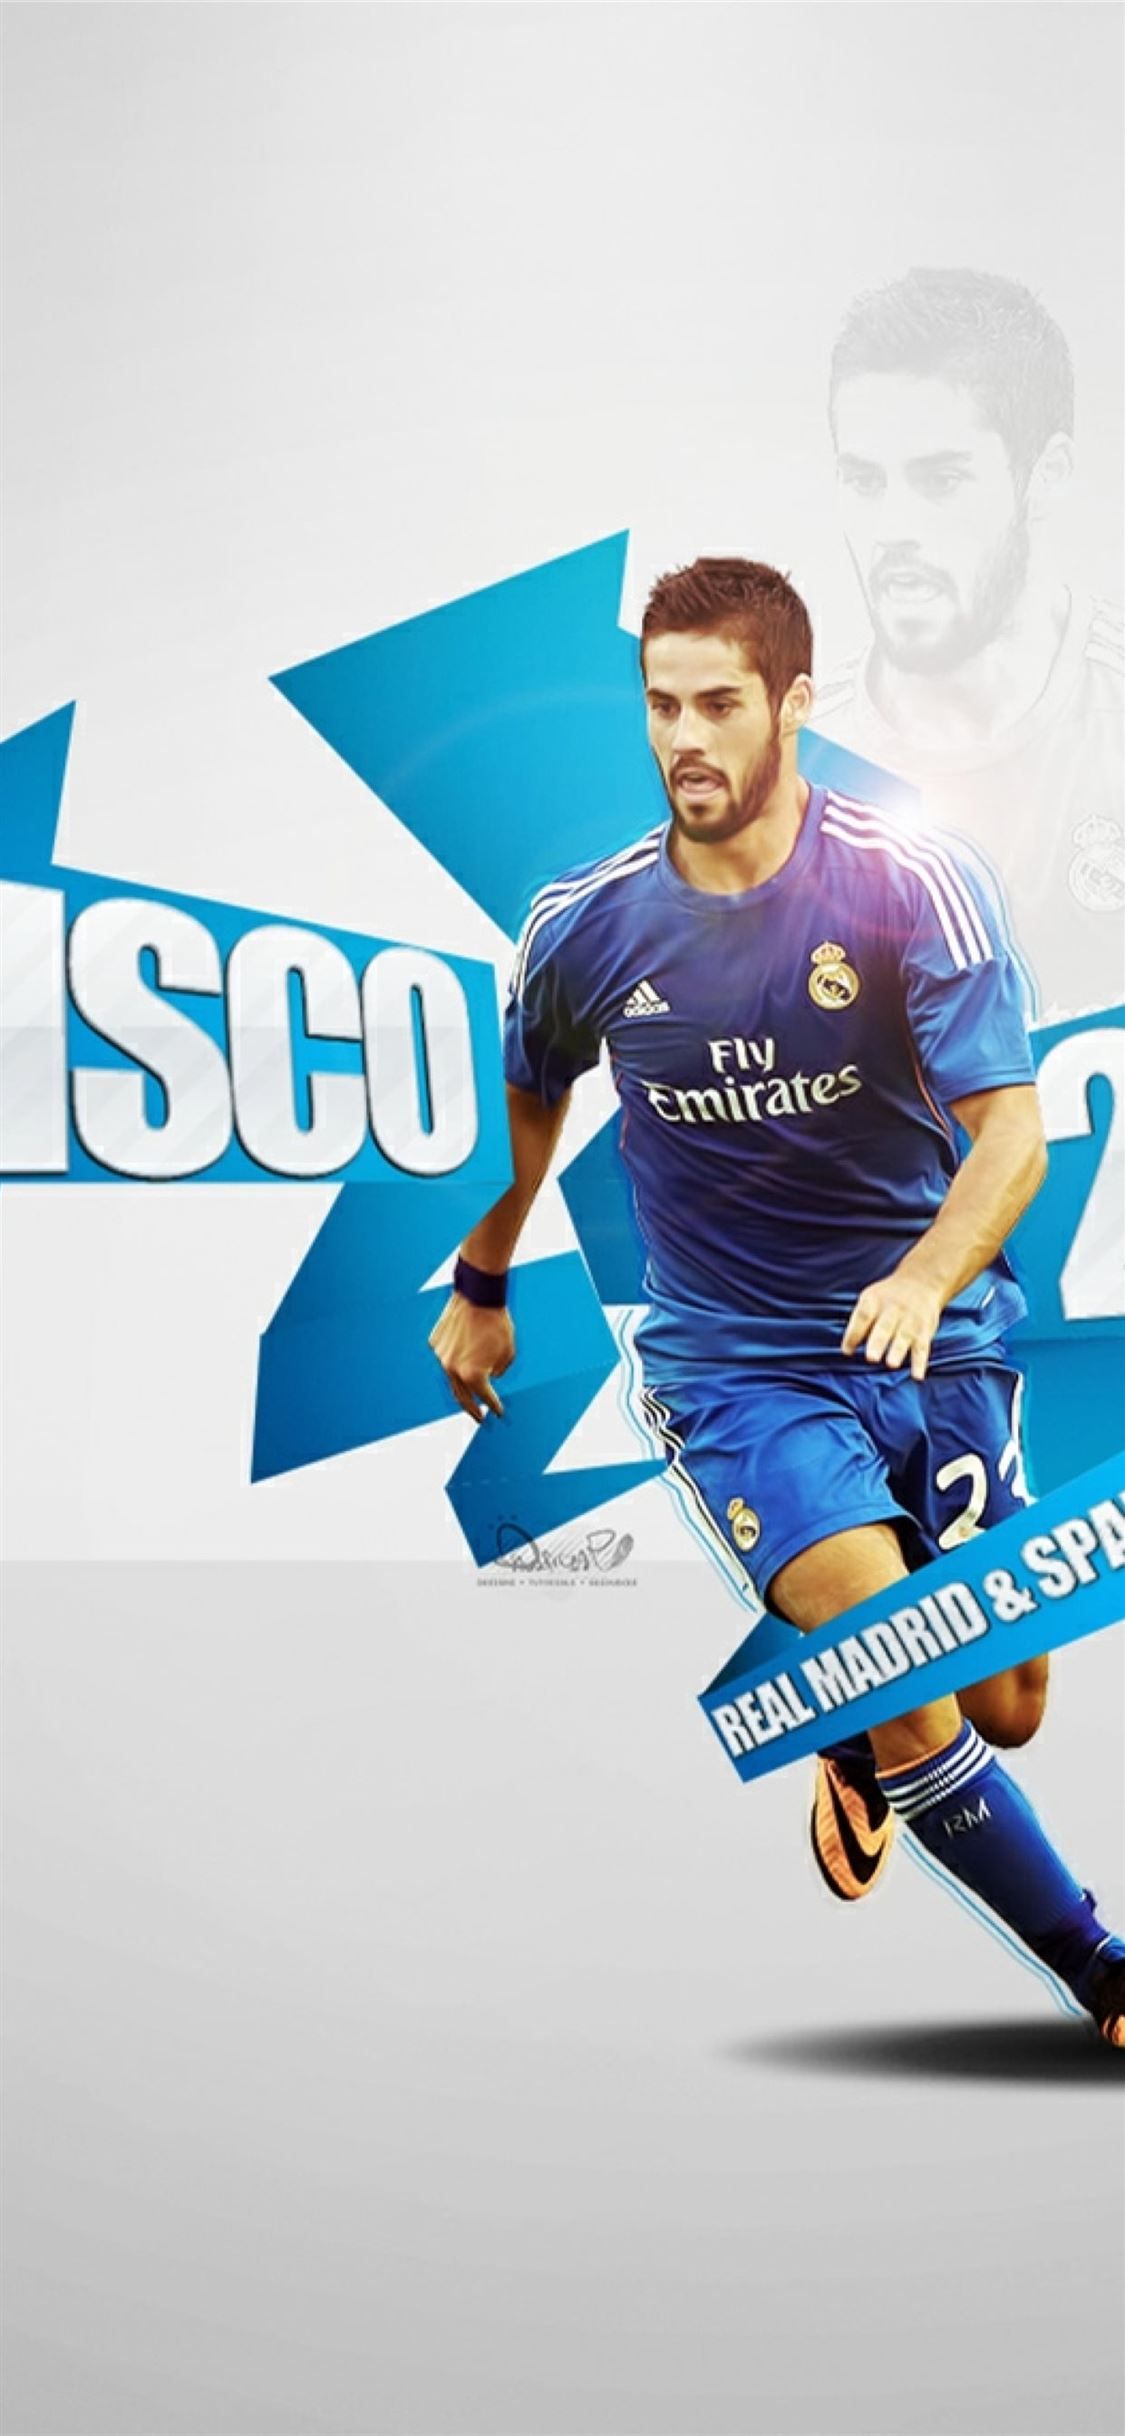 isco real madrid soccer Samsung Galaxy Note 9 8 S9... iPhone 11 Wallpapers Free Download